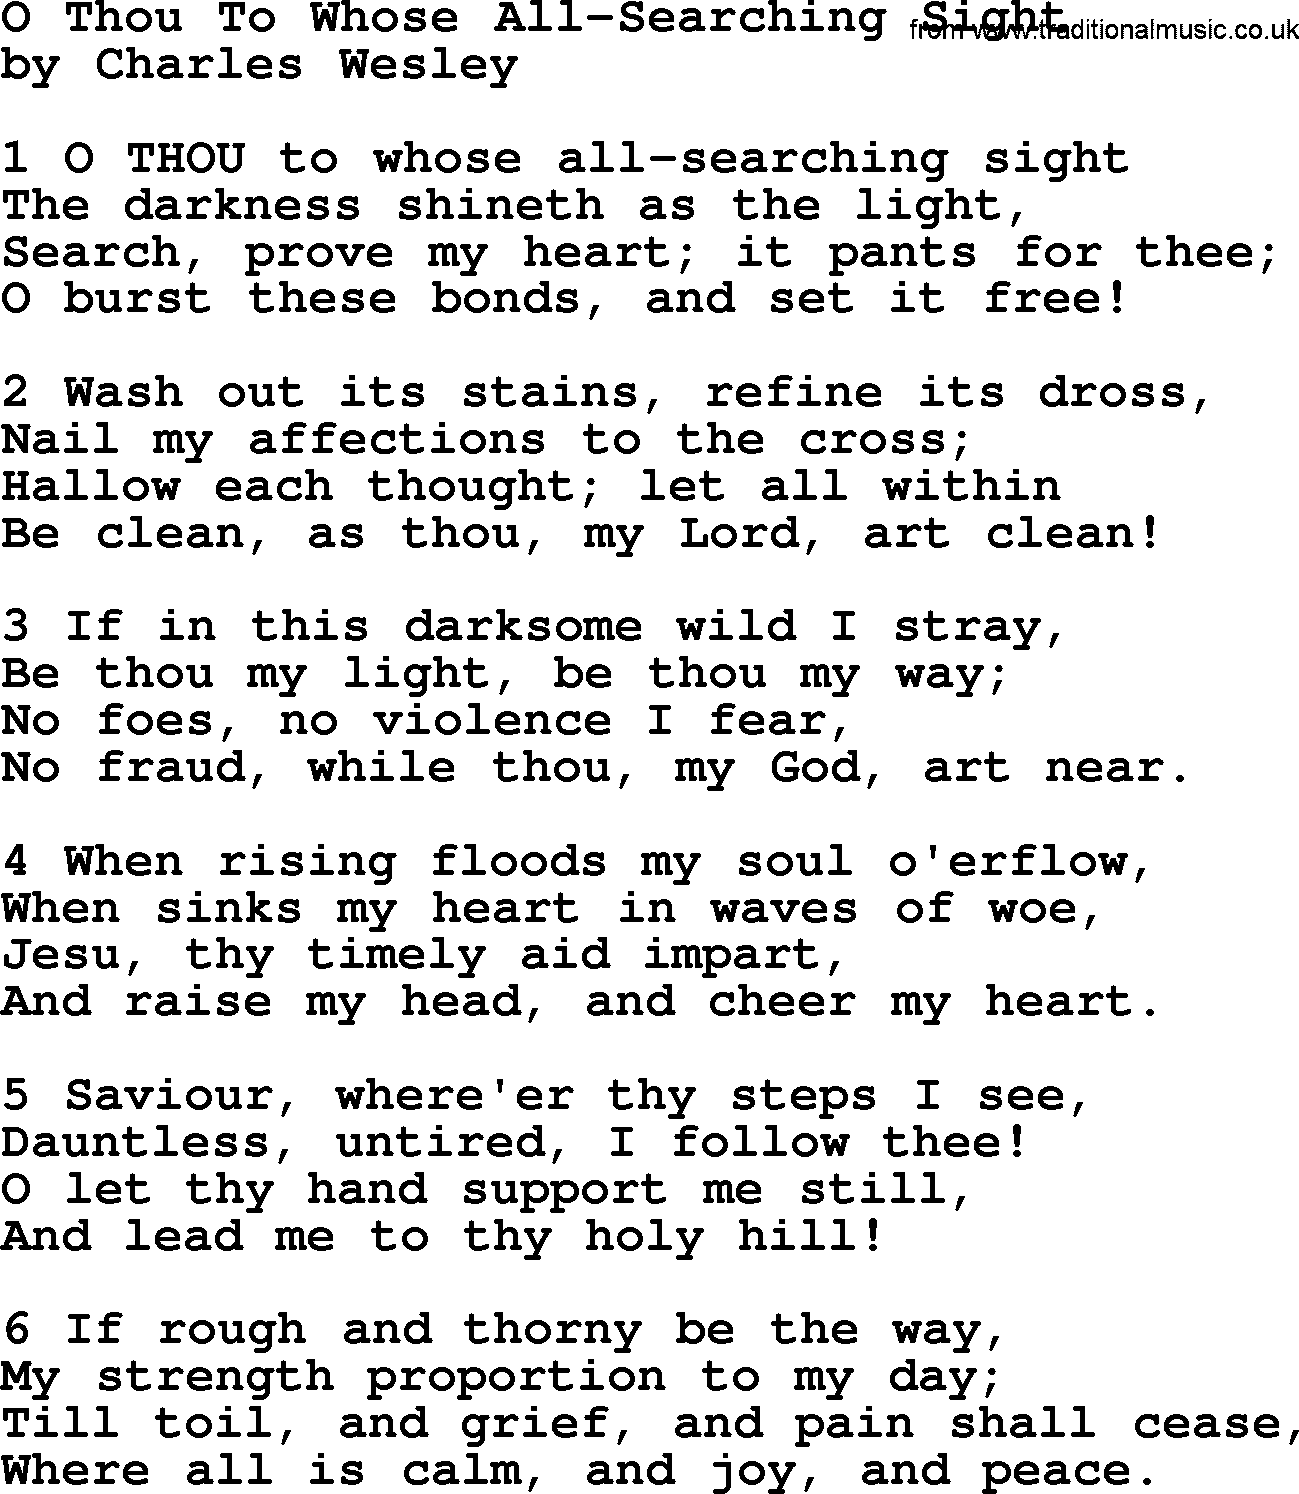 Charles Wesley hymn: O Thou To Whose All-Searching Sight, lyrics